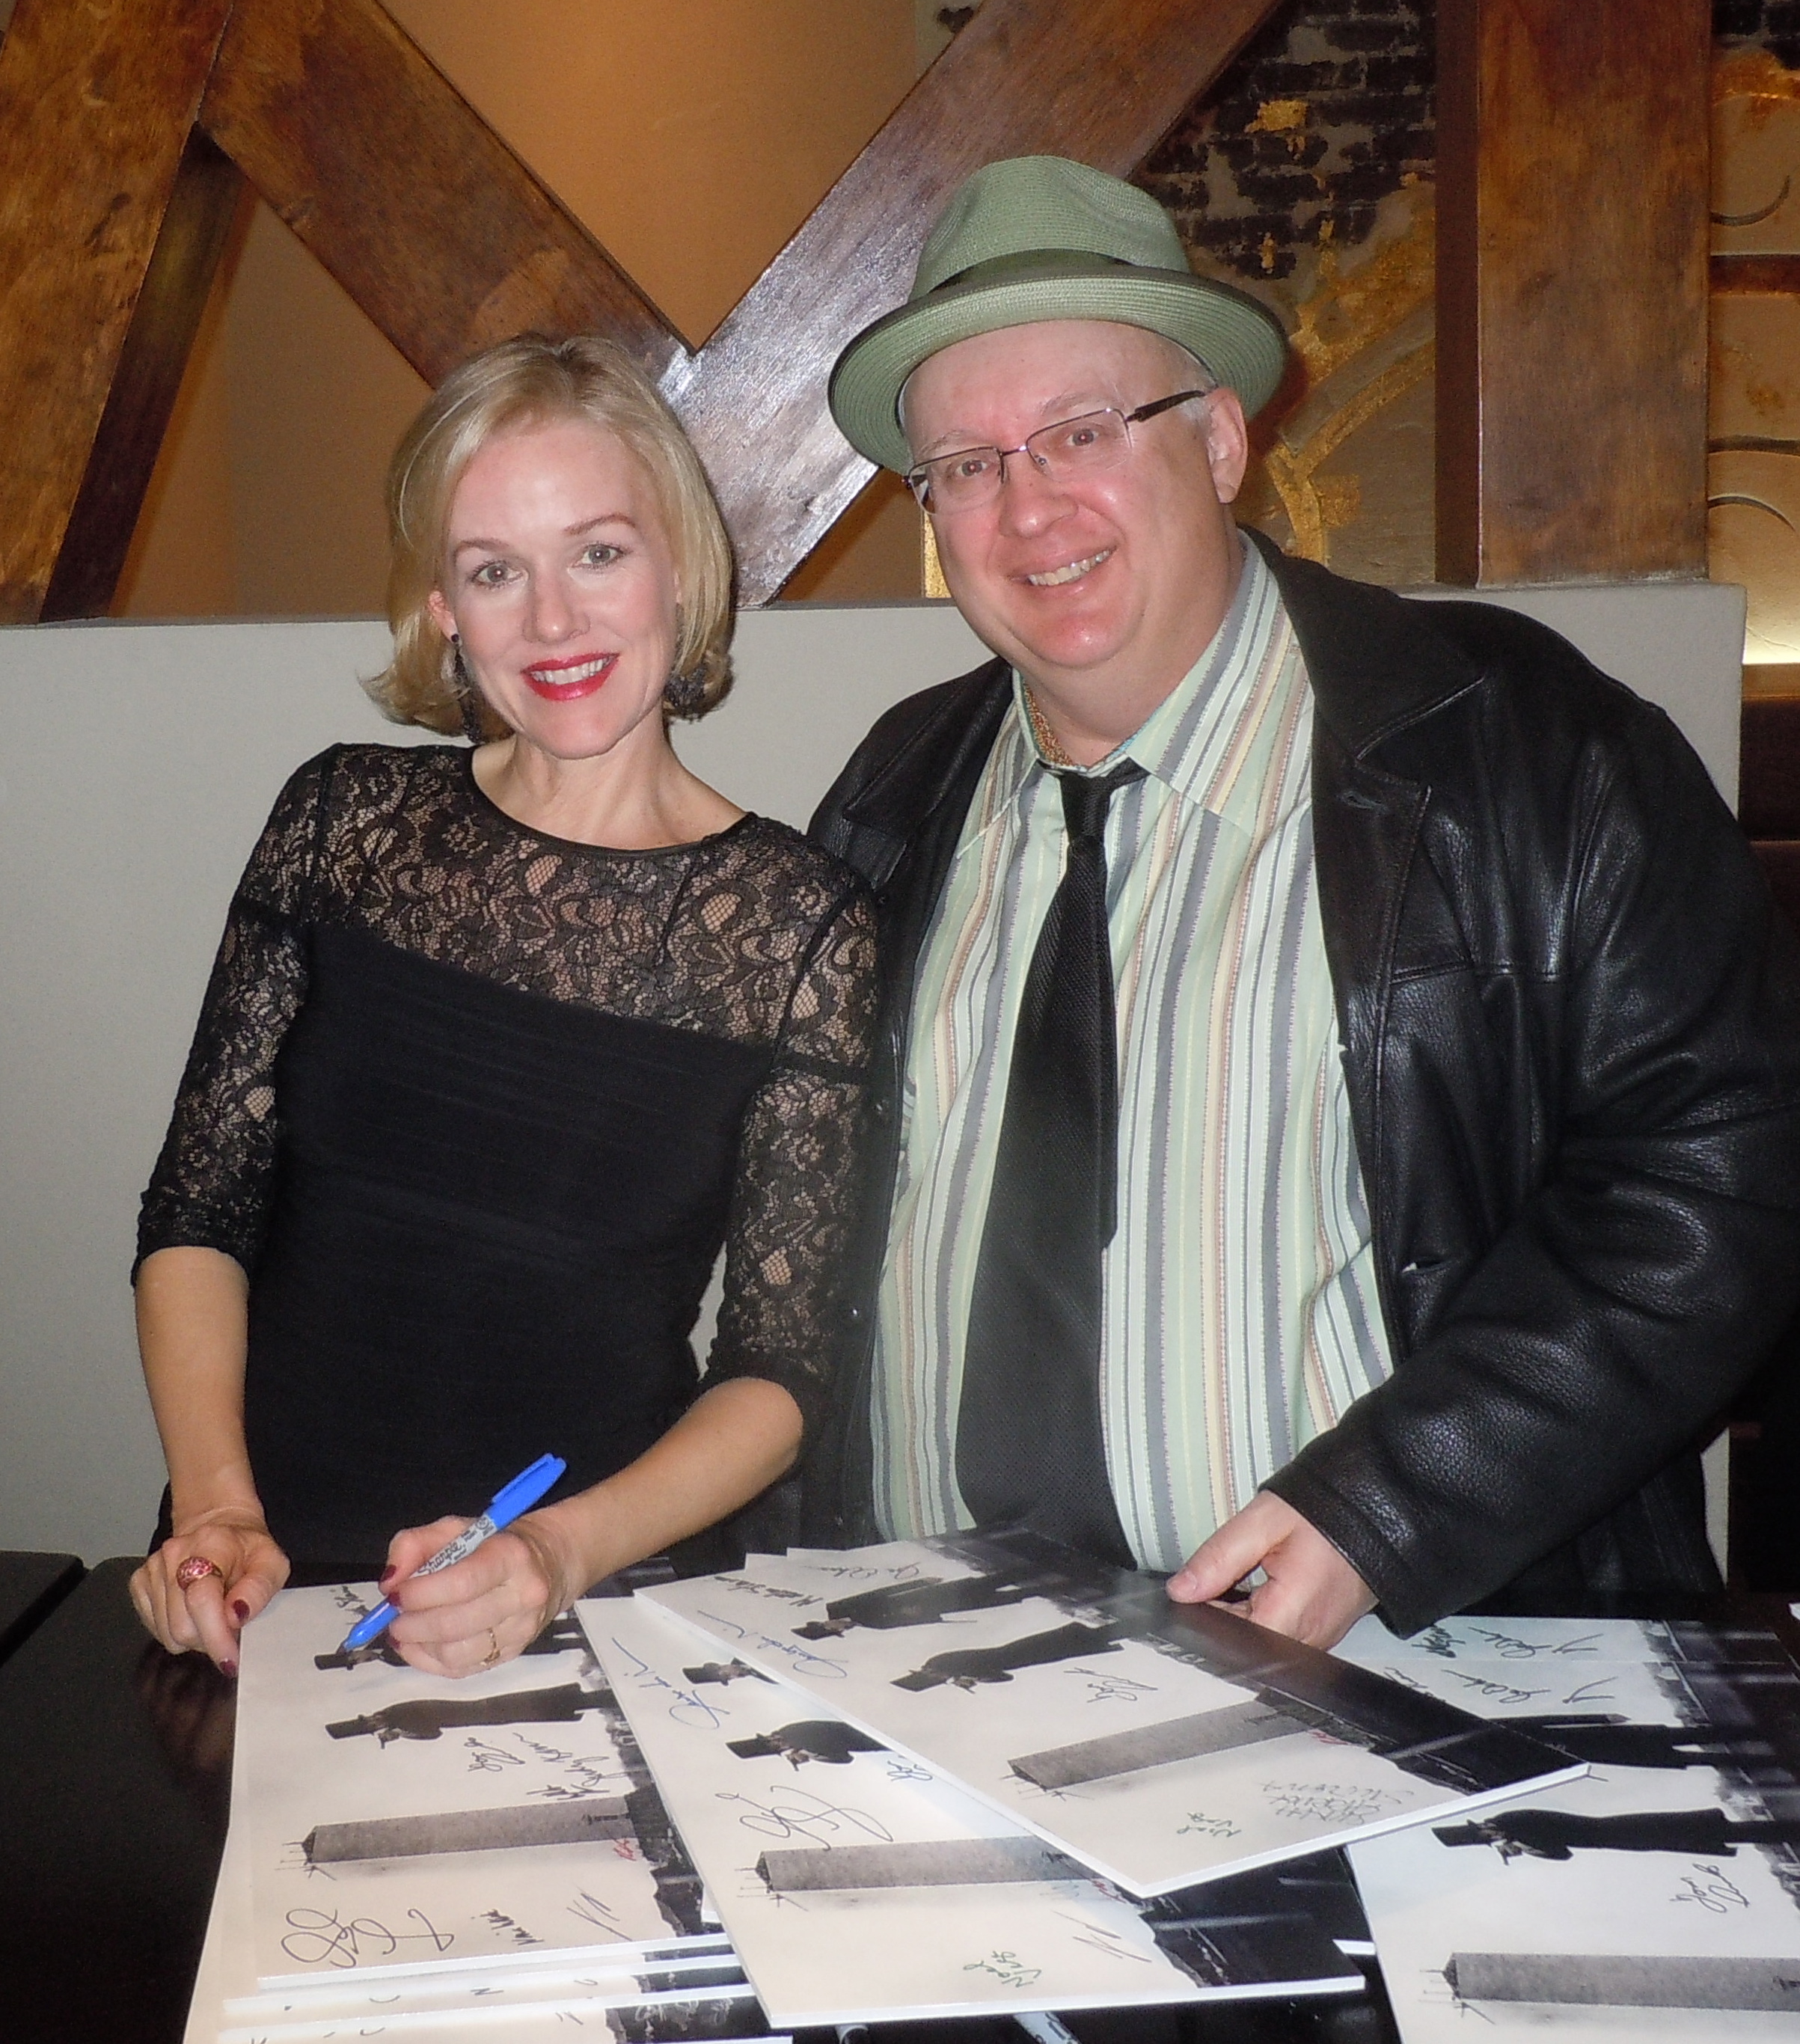 Signing photos with the wonderful Penelope Ann Miller at the premiere of SAVING LINCOLN